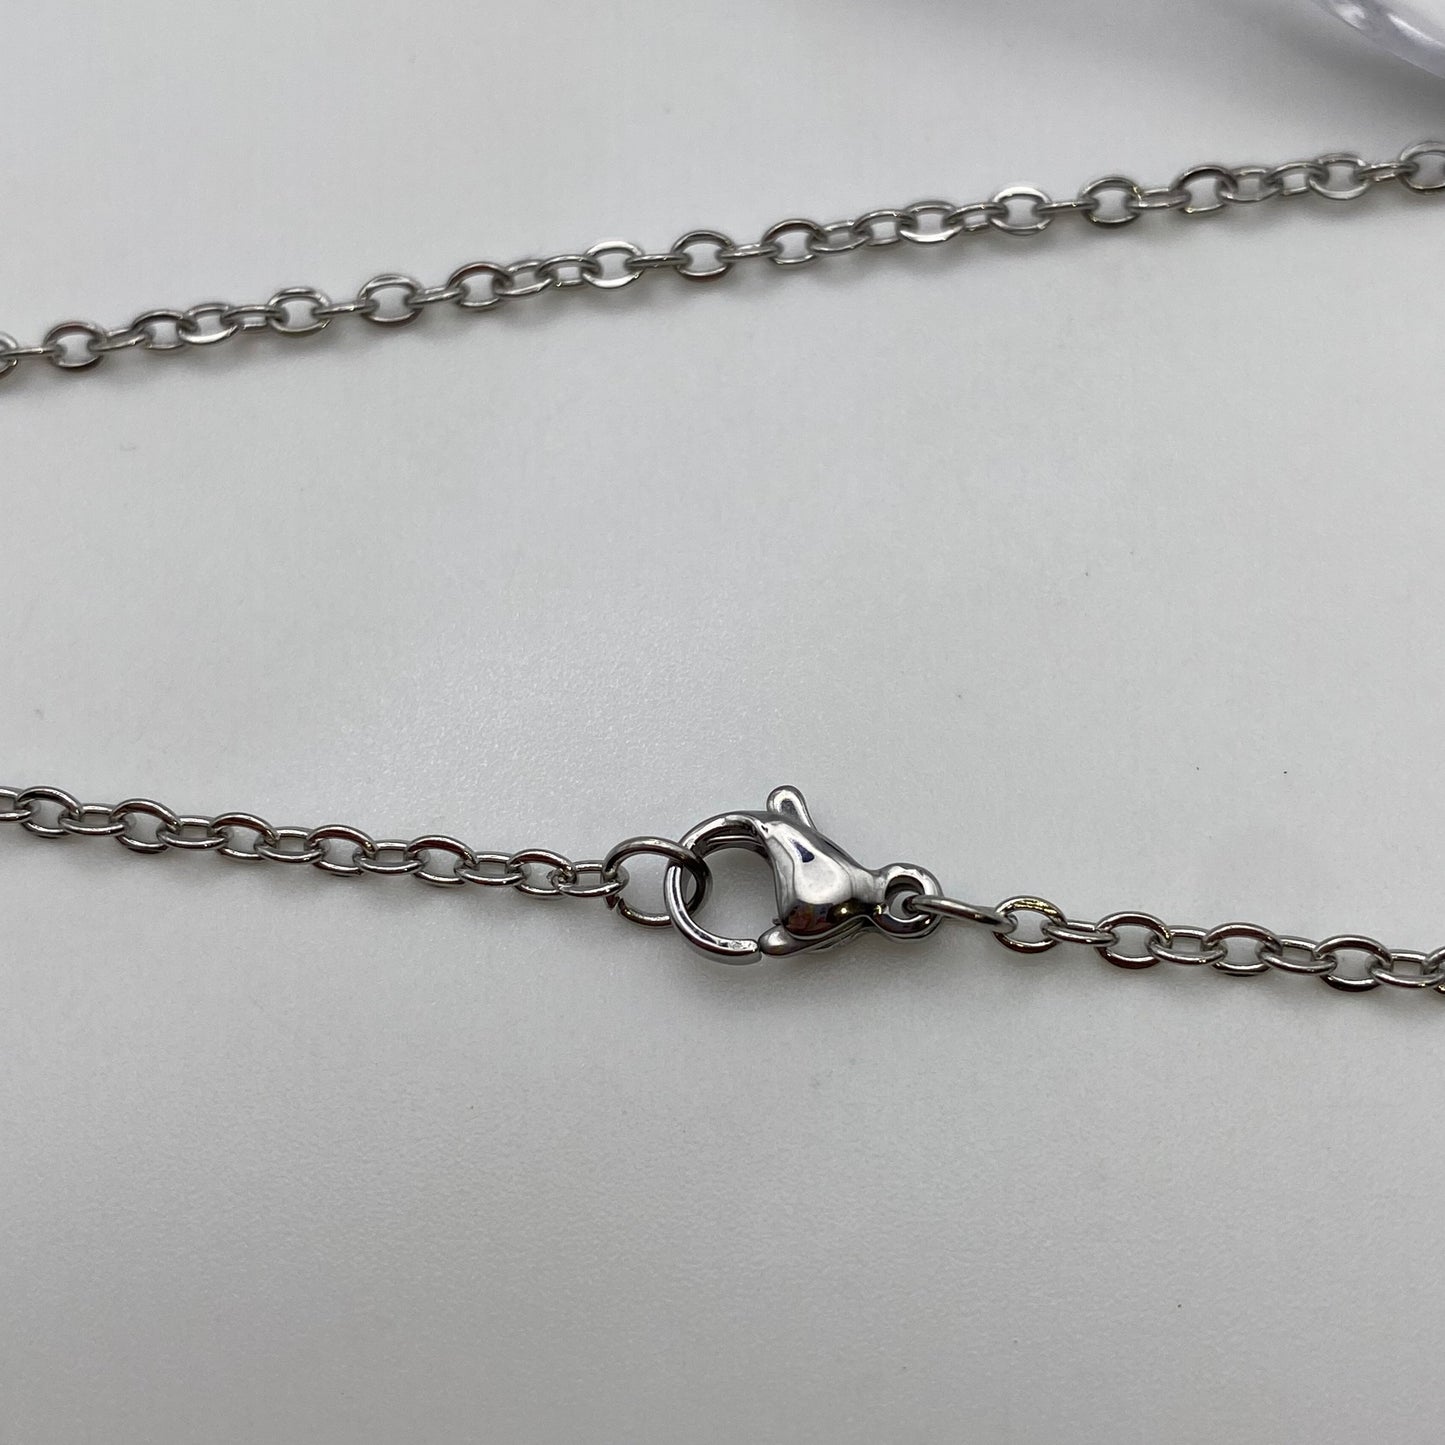 Silver Abstract Half Face Necklace